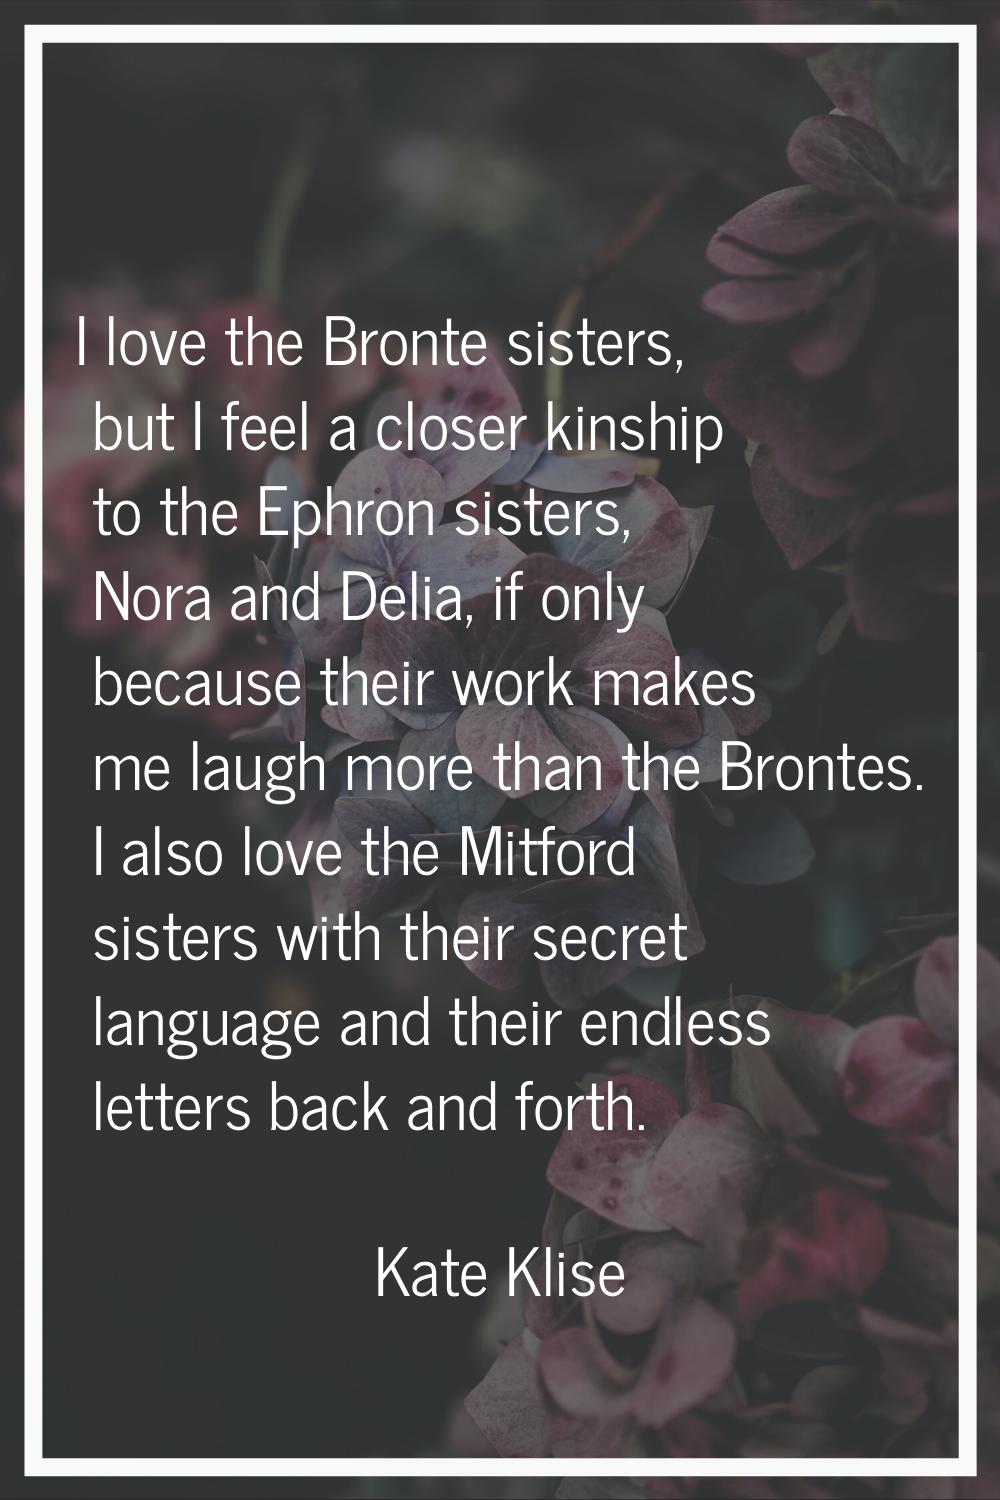 I love the Bronte sisters, but I feel a closer kinship to the Ephron sisters, Nora and Delia, if on